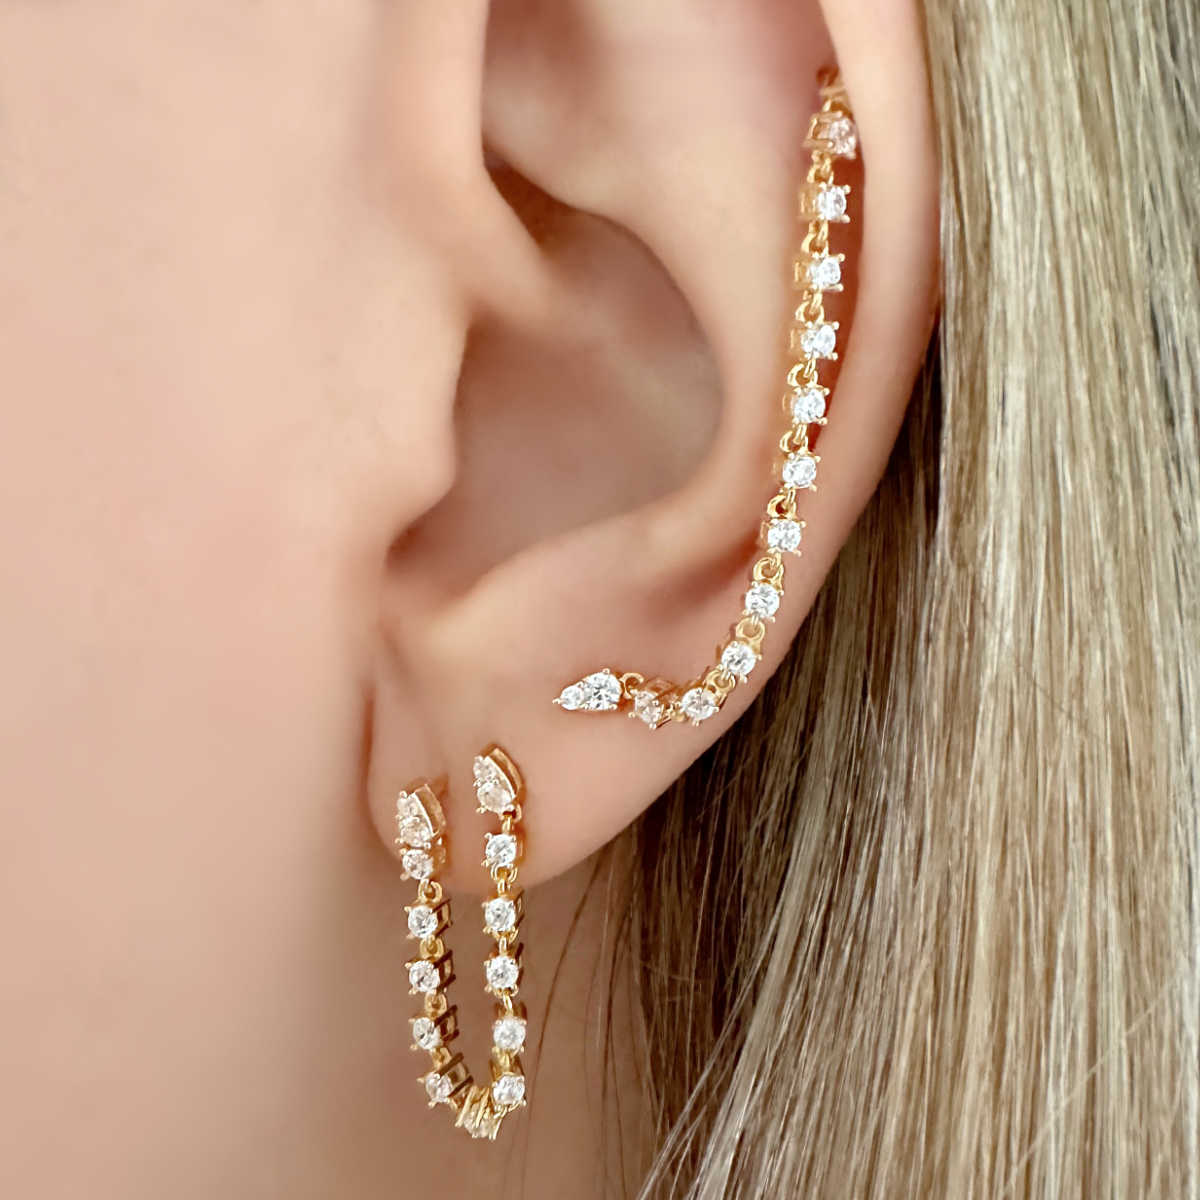 Gold Chain Tennis Earrings, Connected Double Piercing Studs on Model